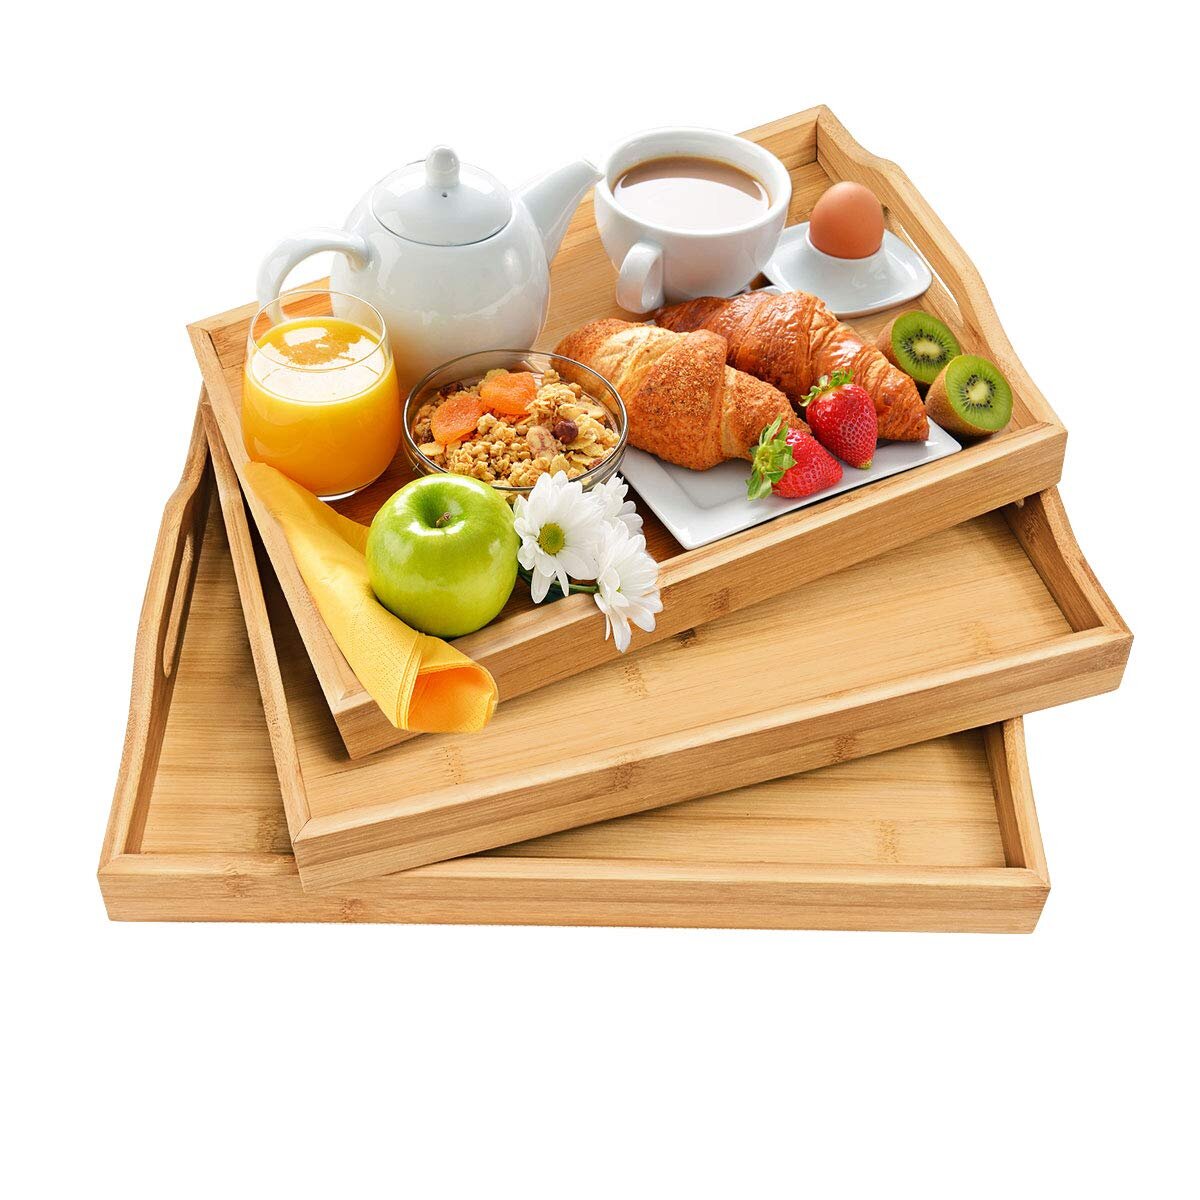 M&W Wooden Serving Platters Perfect for Breakfast in Bed & Tea Set of 3 Bamboo Trays Raised Edges & Lightweight Serving Tray With Handles 